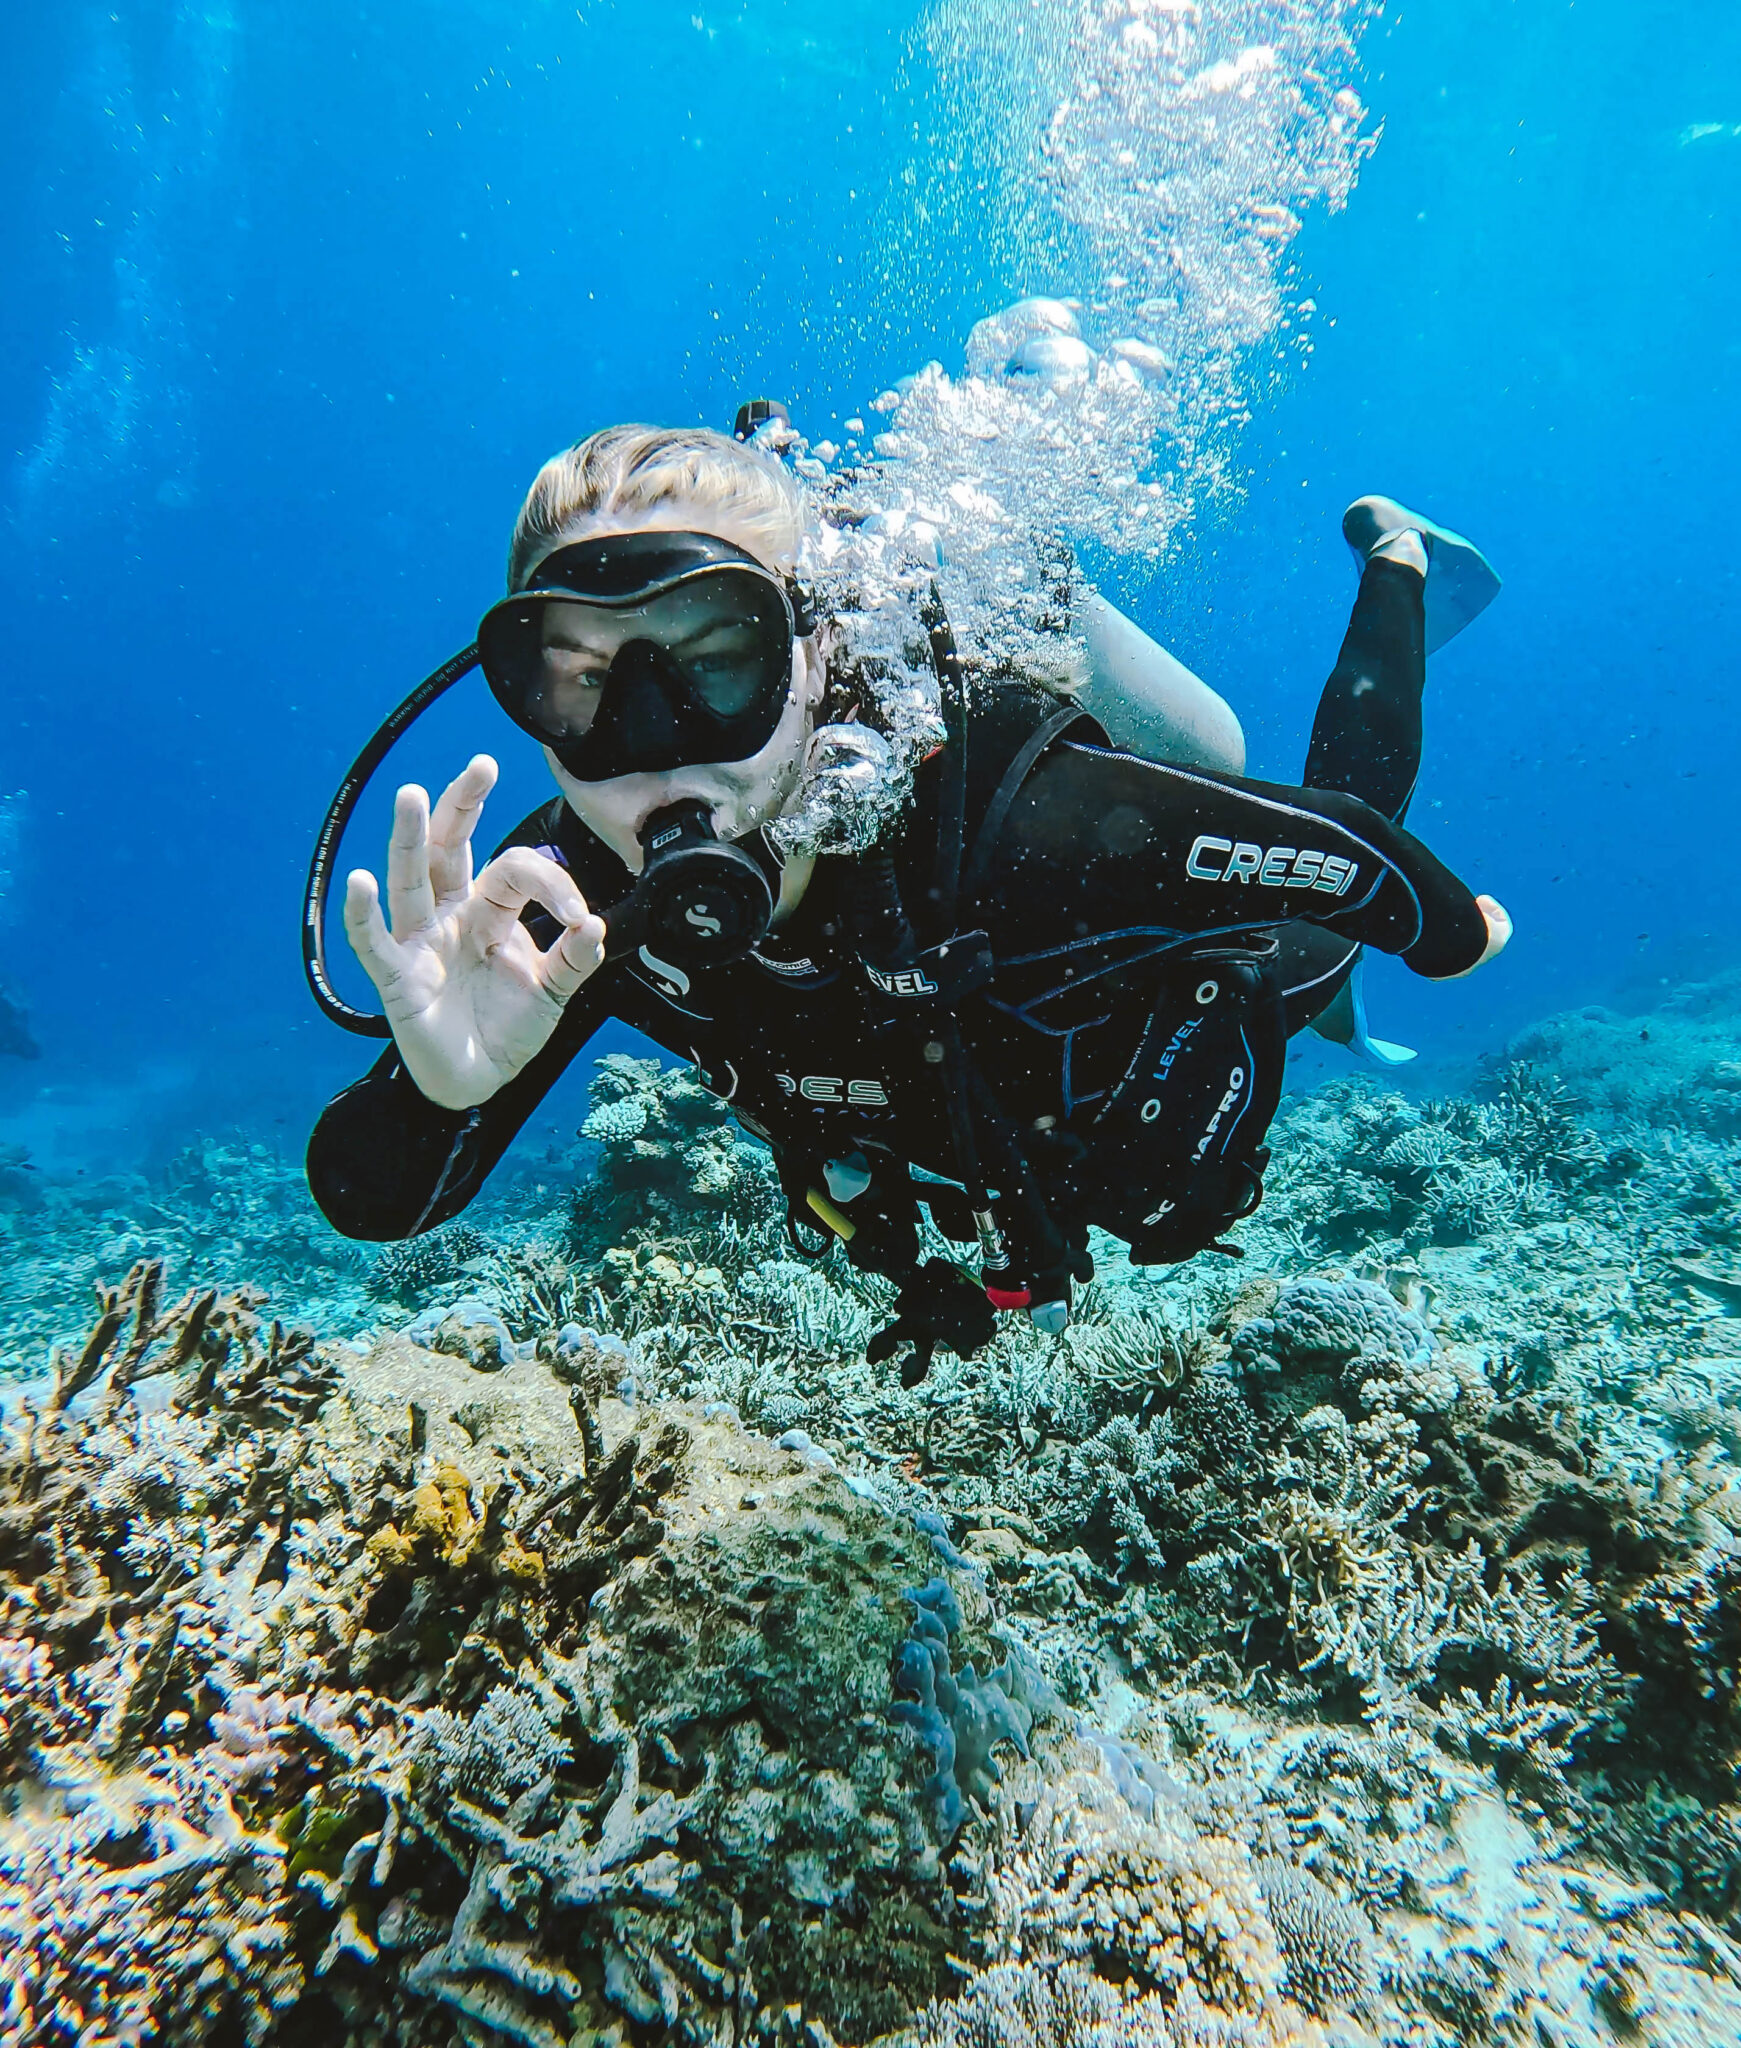 diver looking at the camera and giving the OK sign